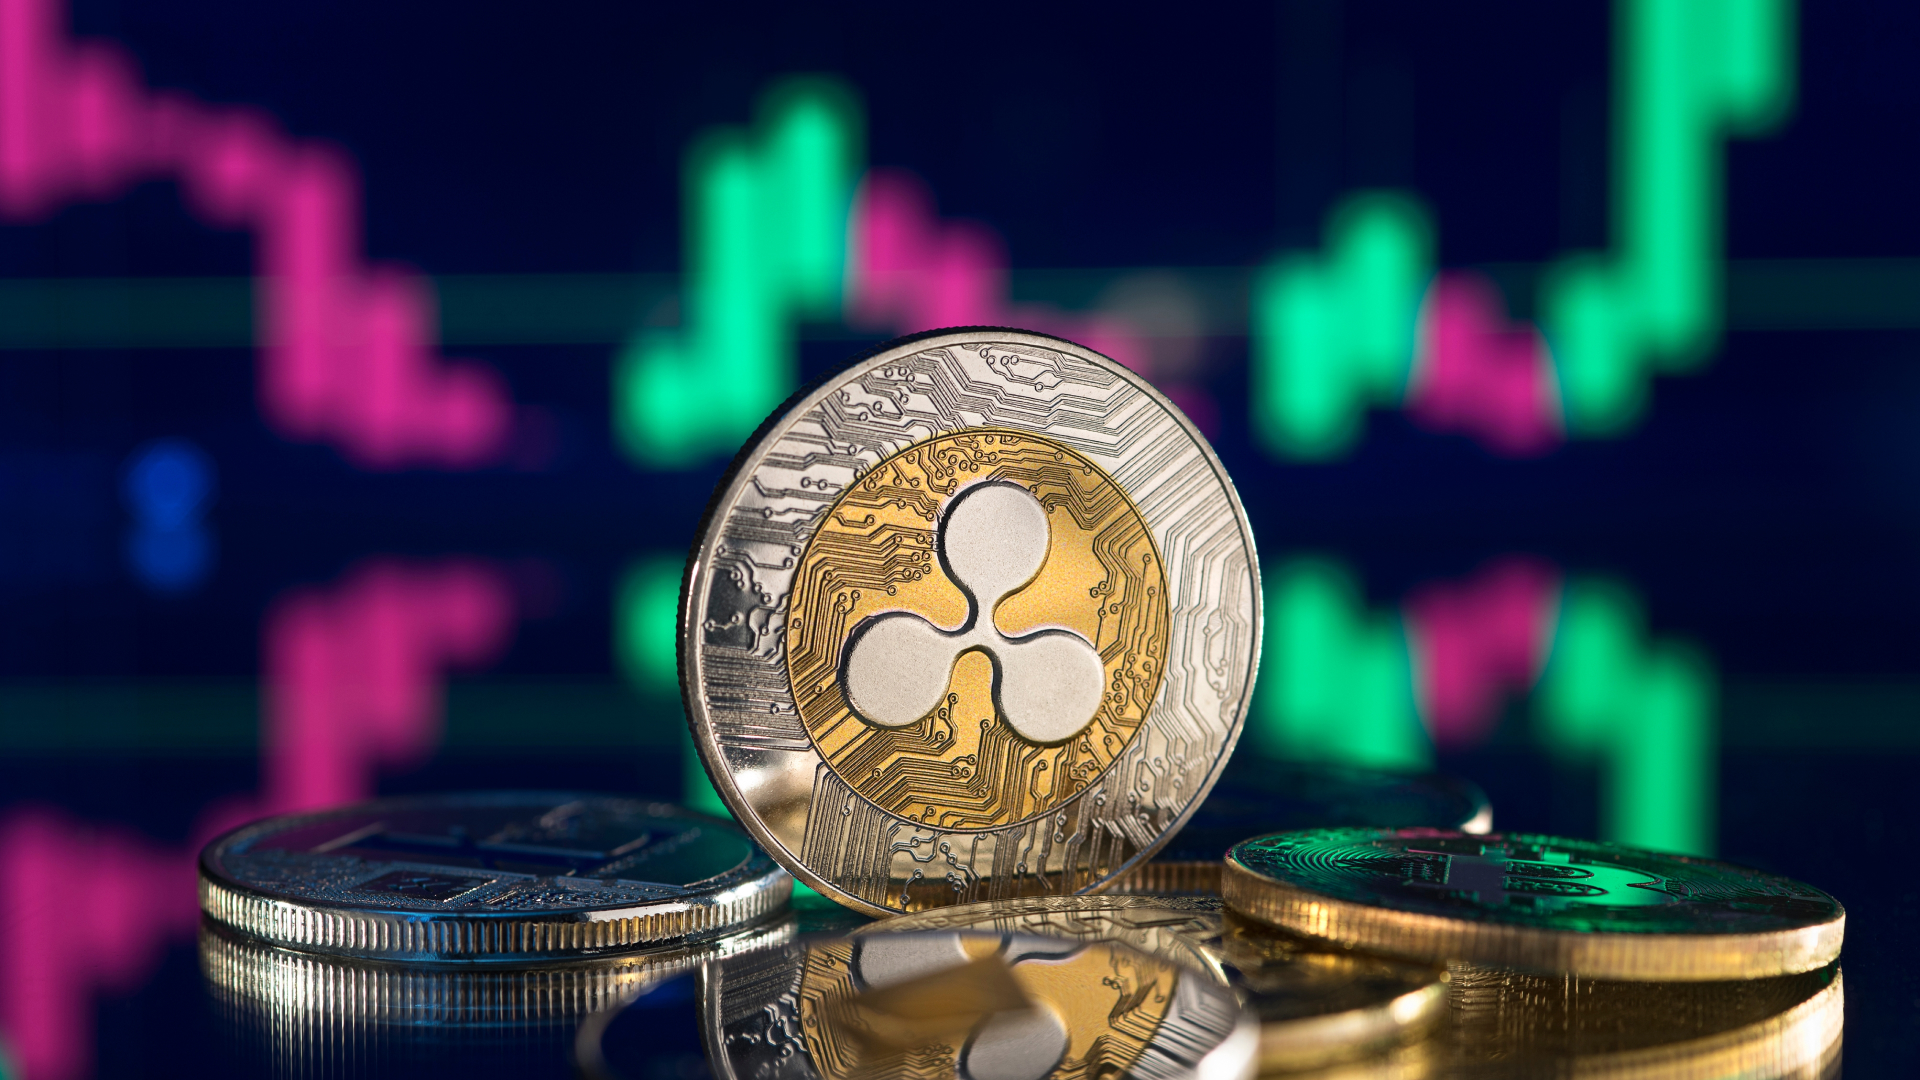 Xrp Holders To Receive Xcore Airdrop - Crypto Insight